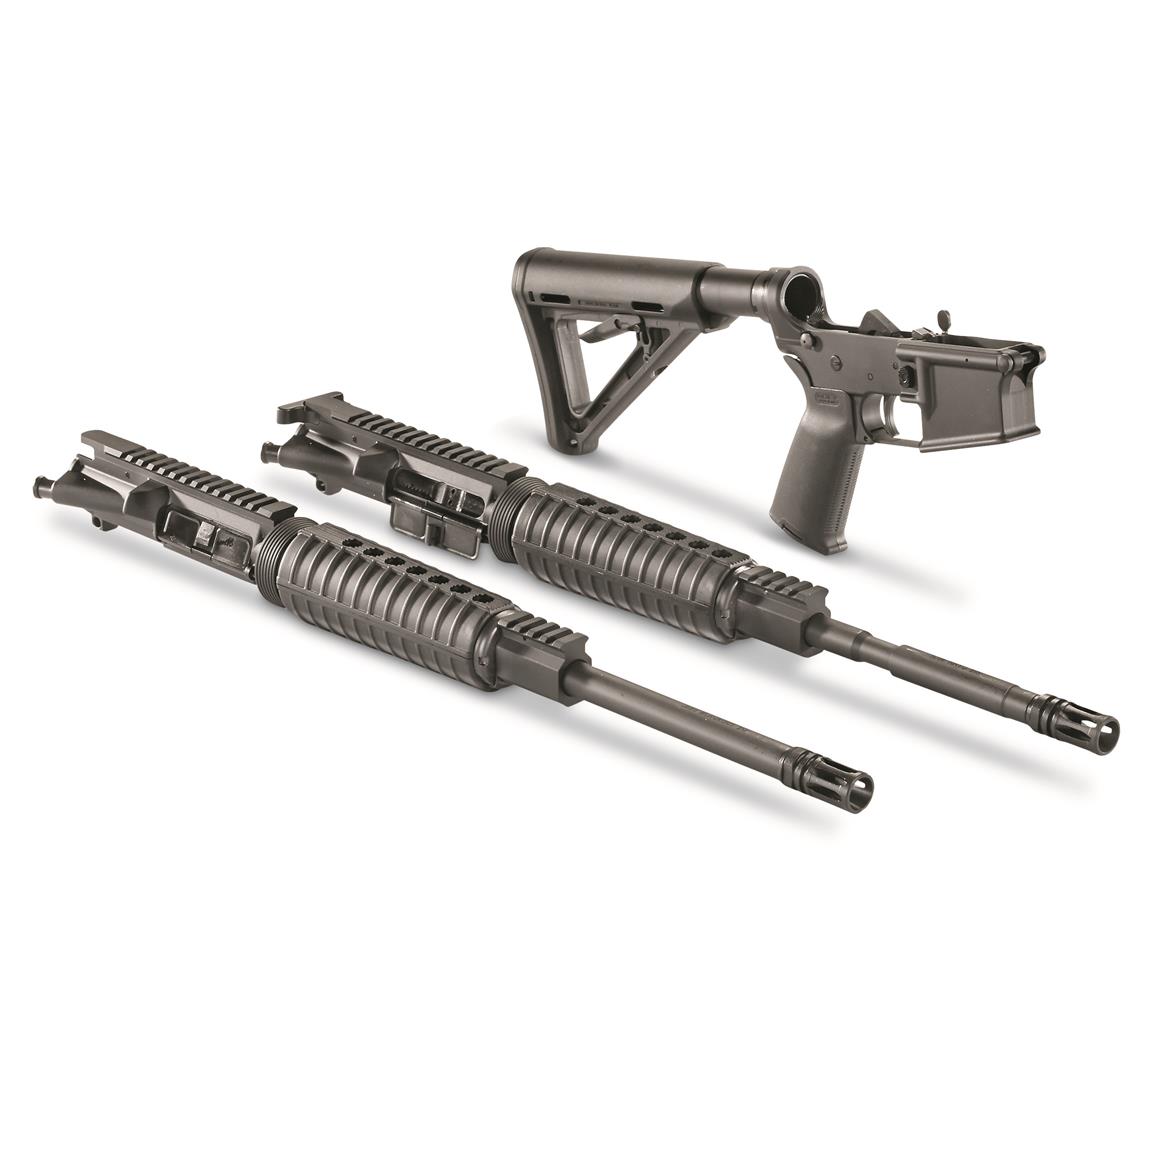 Anderson AR-15 Carbine, Semi-Automatic, 5.56 NATO/.300 AAC Blackout, Includes Two Uppers, No Mag